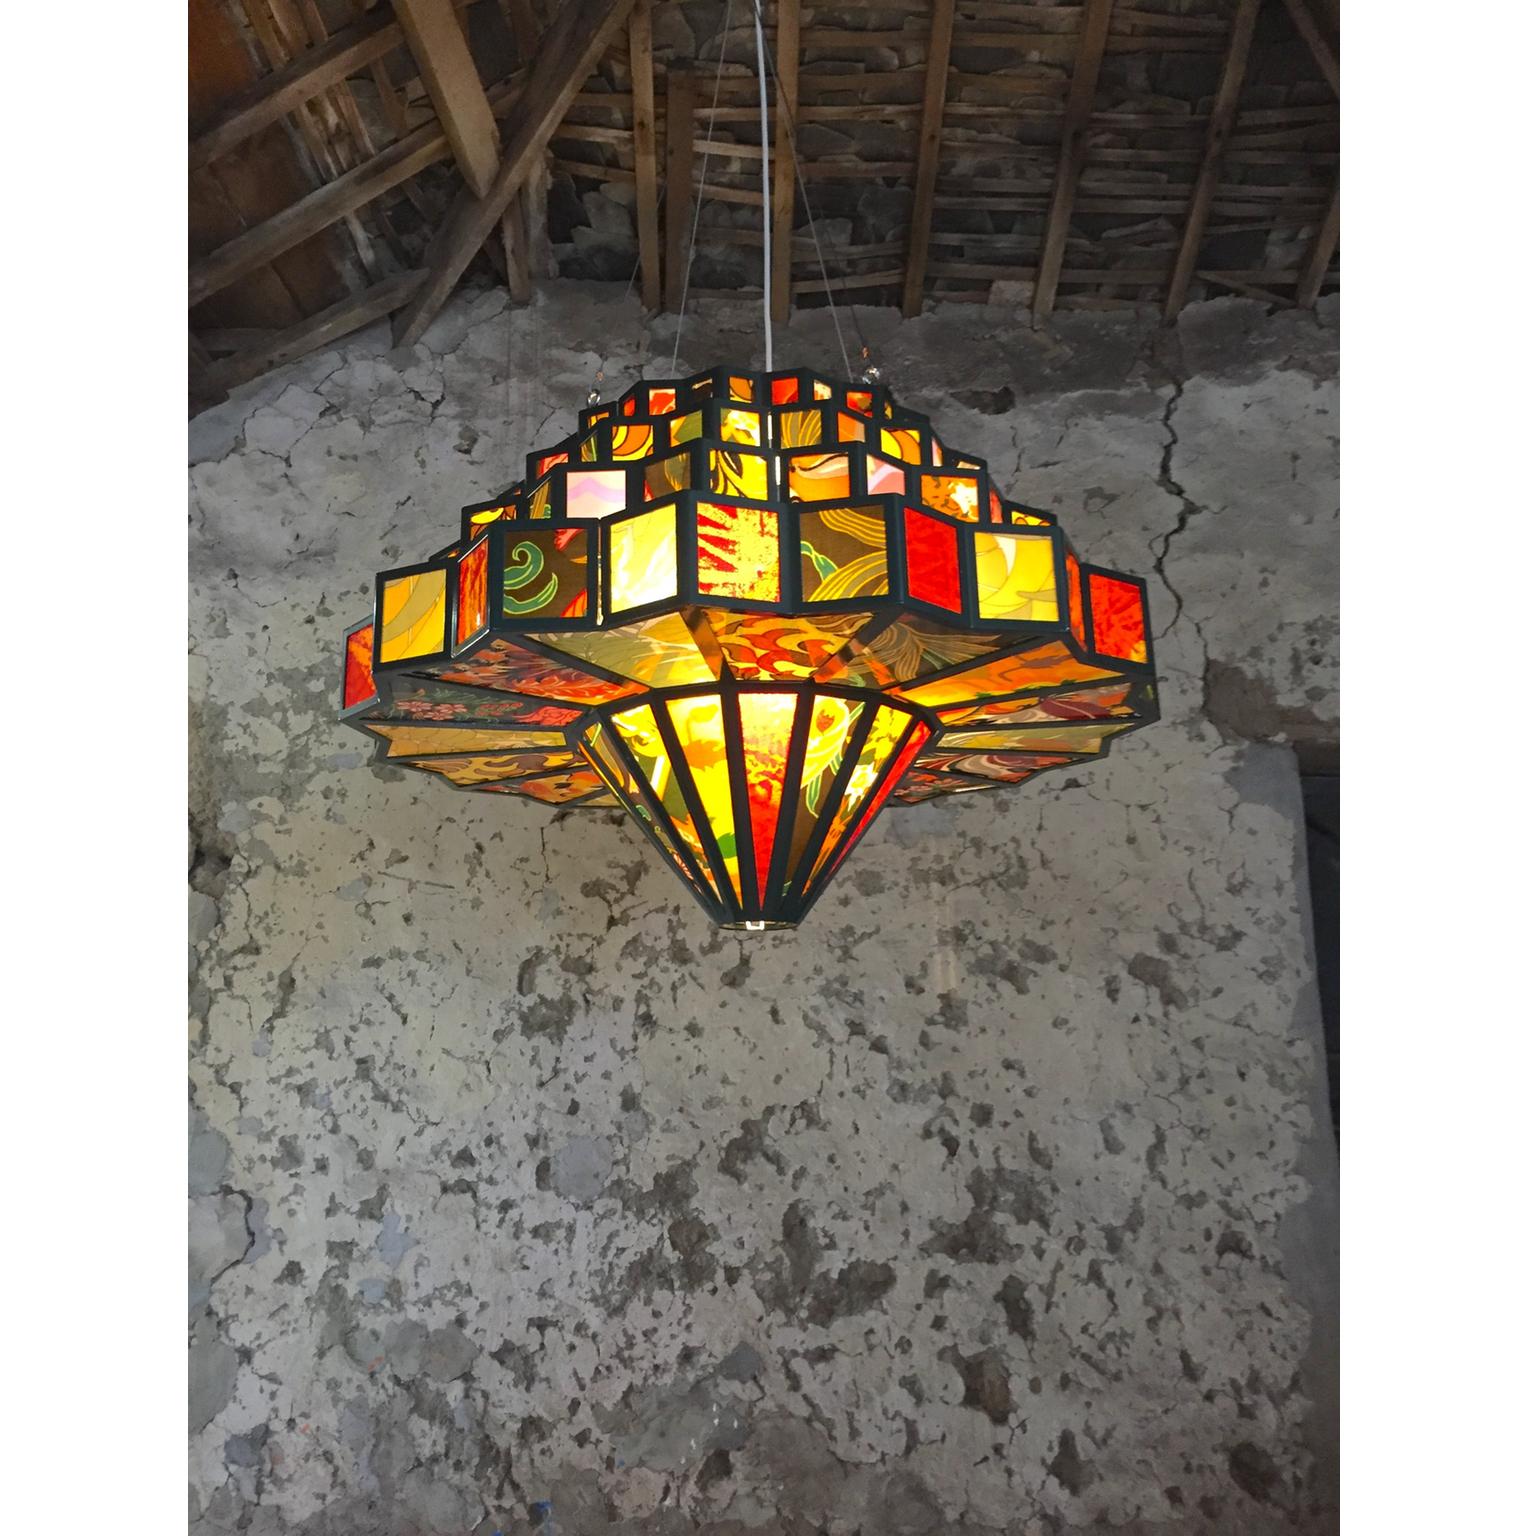 The chandelier you are viewing is the original mark #1 prototype of the Sunbeam Jackie Chandelier, made in 2018 this is an opportunity to purchase the original working prototype directly from the Sunbeam Jackie studio, a piece which is exemplary of